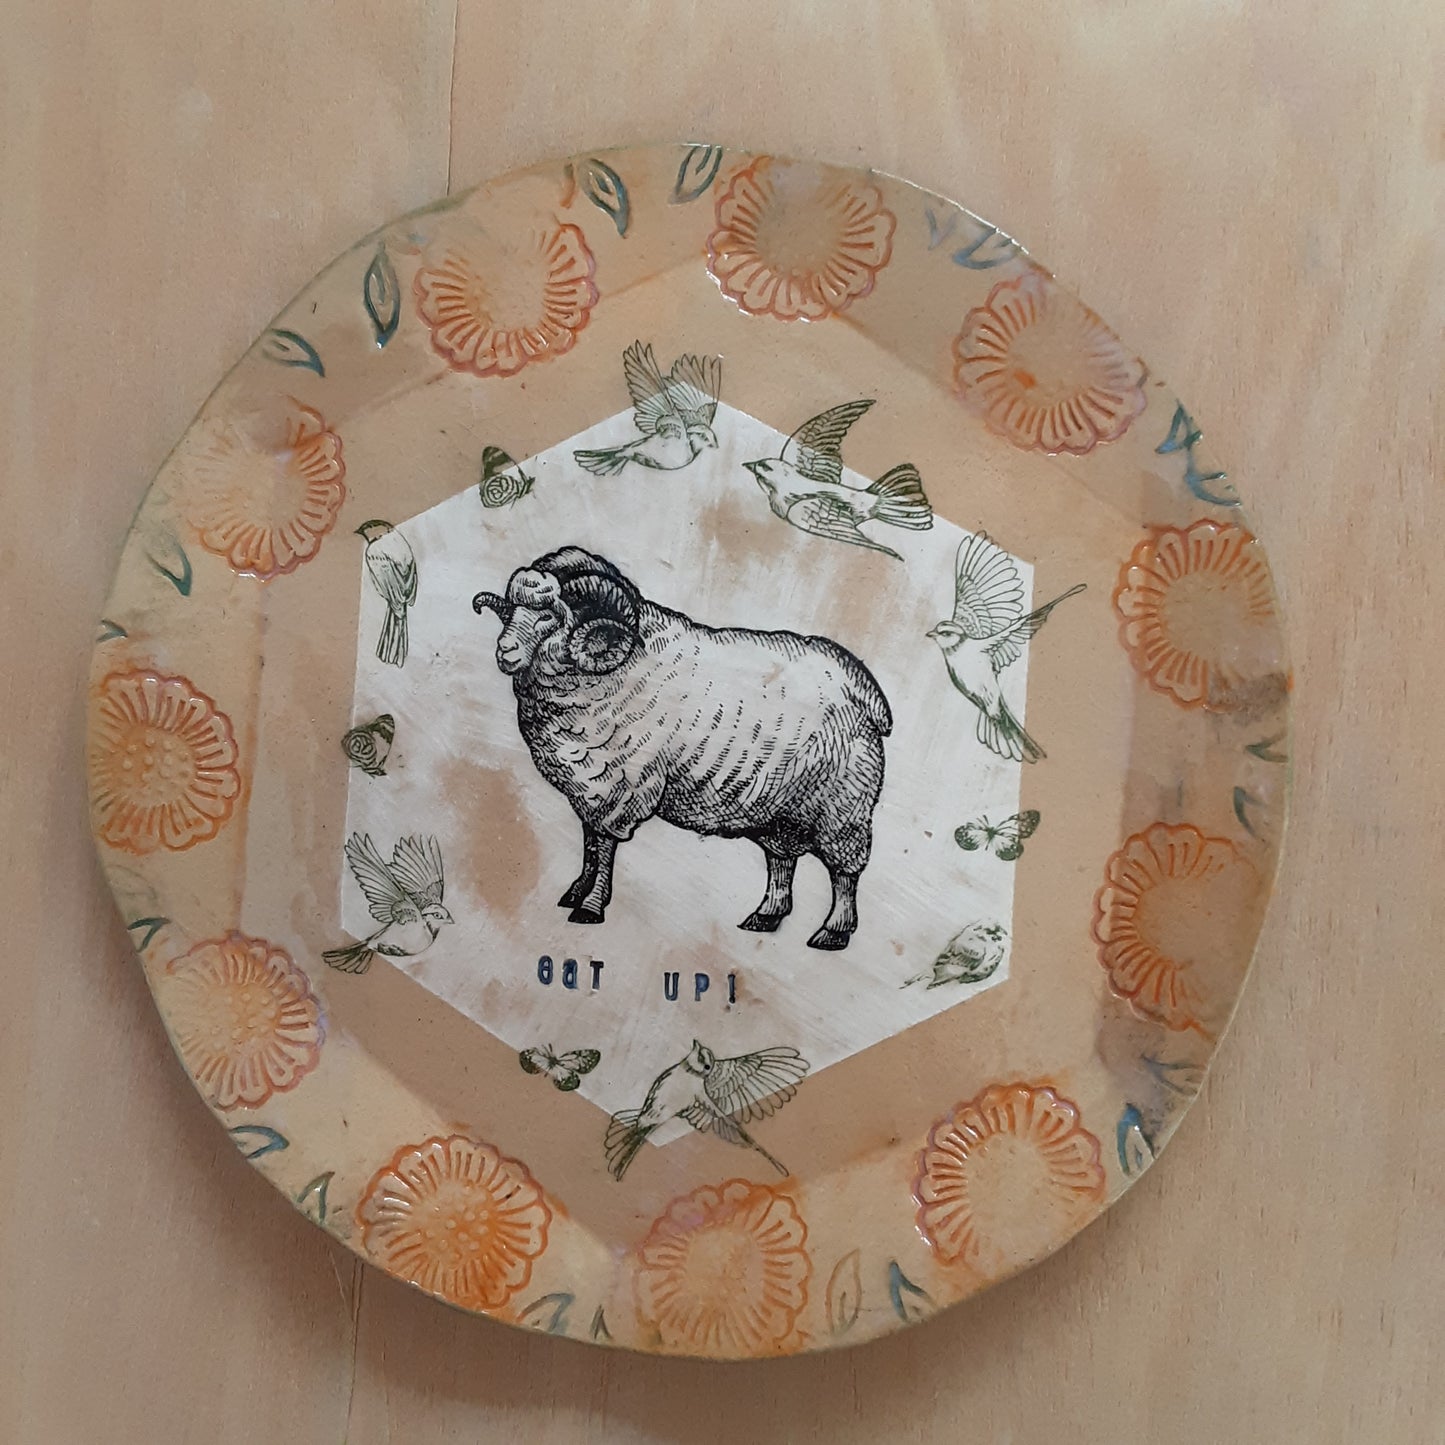 Plate ceramic 21cm, six sided side or food plate.